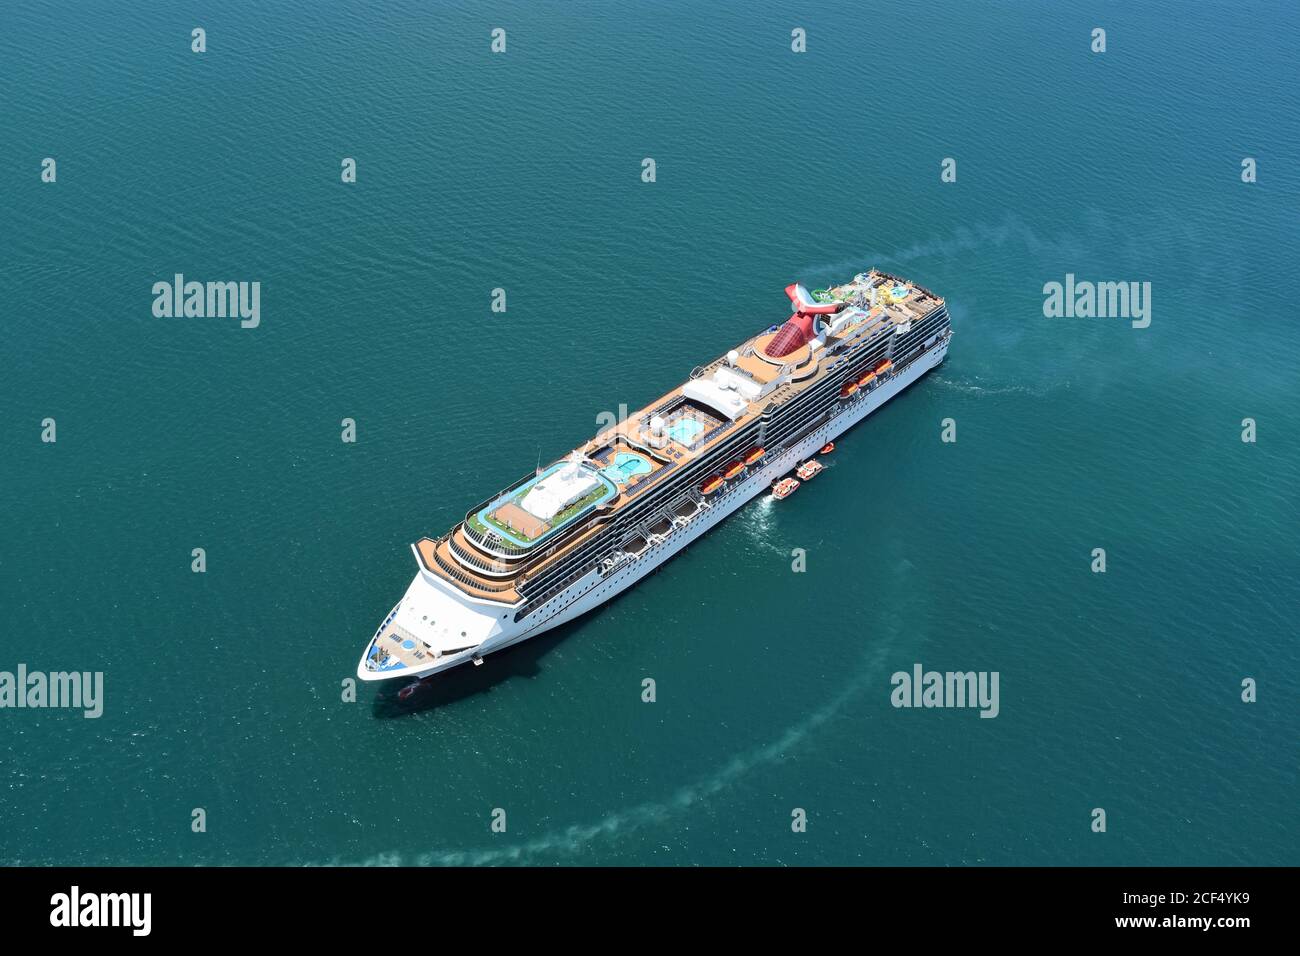 The Carnival Spirit anchored off the coast of Port Denarau in Fiji.  The cruise ship is seen during a tendering operation.  Green blue water. Stock Photo